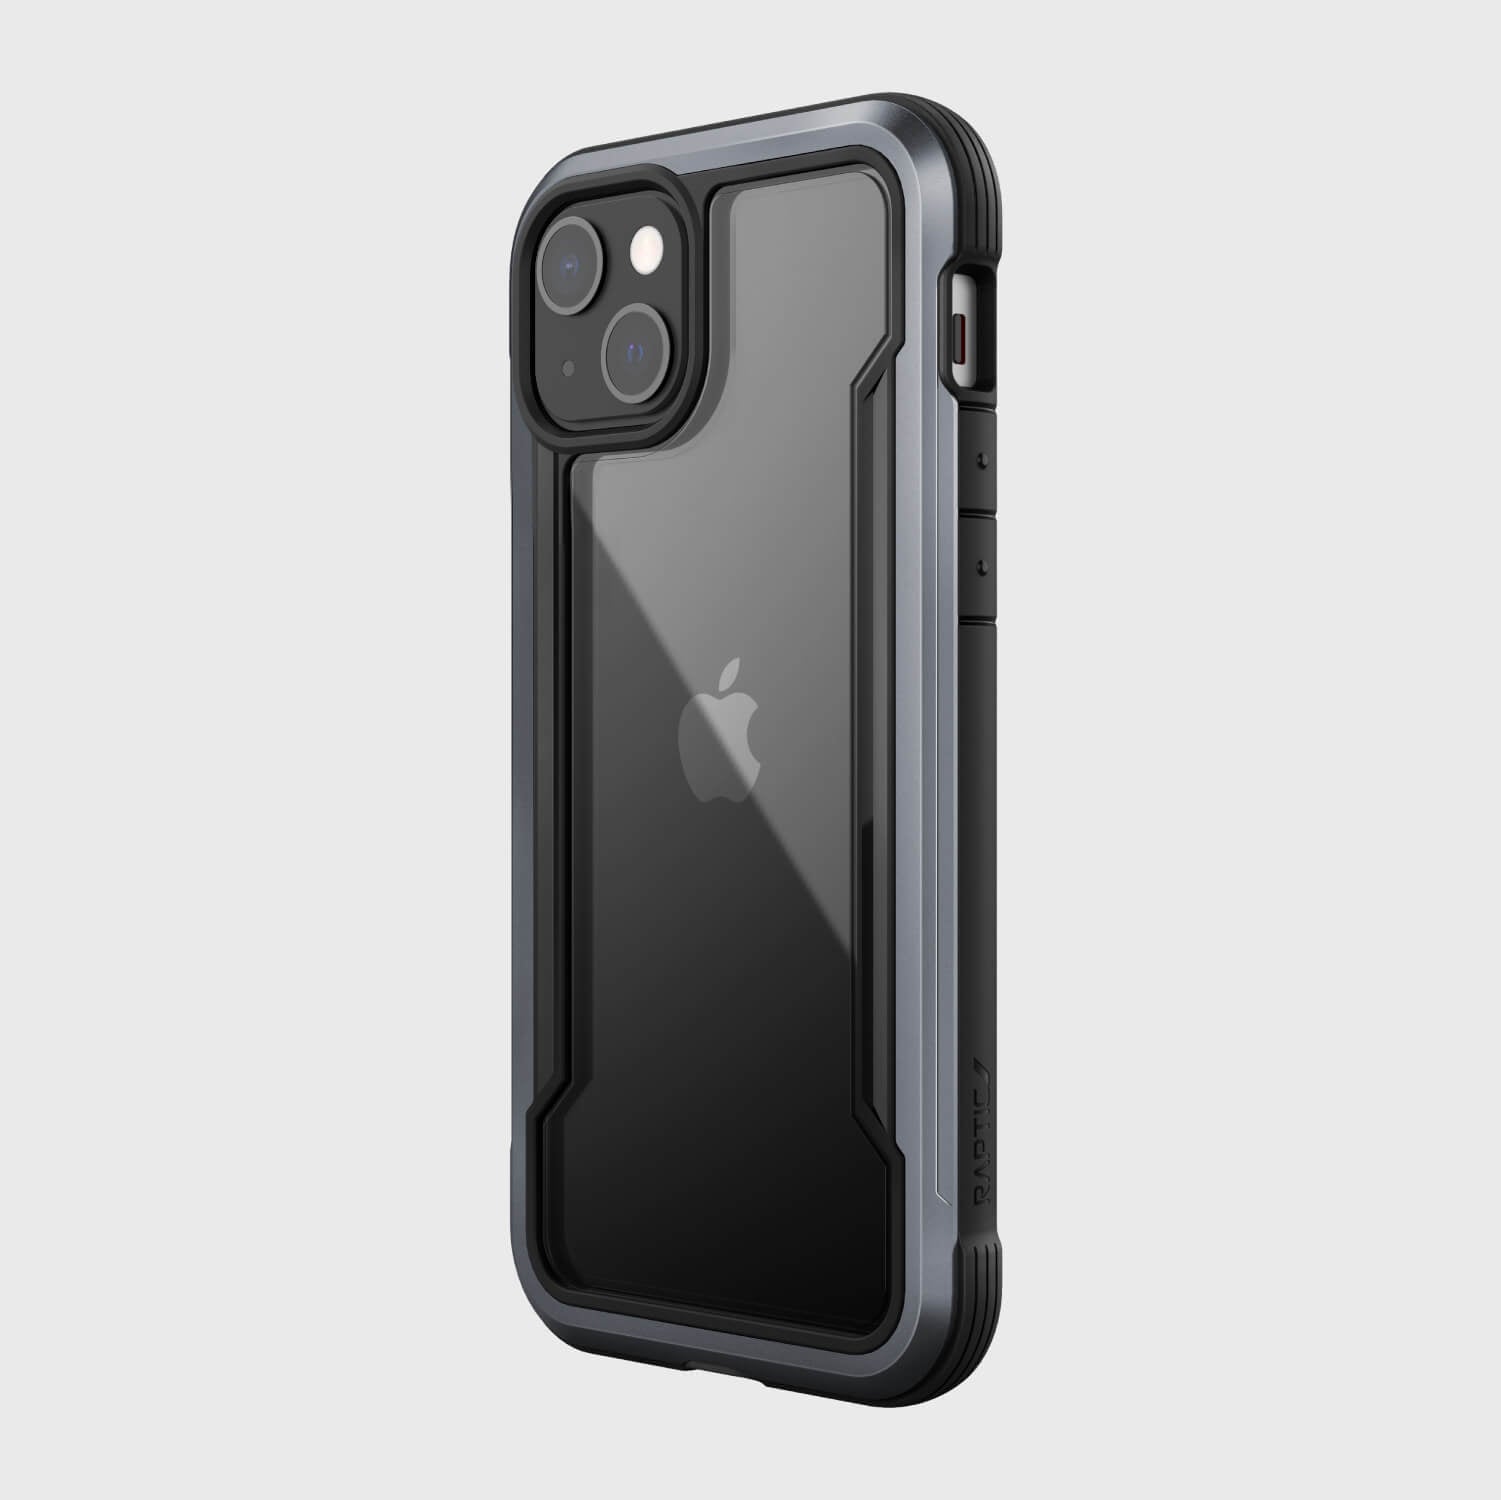 The back of the iPhone 13 Case - SHIELD PRO, Raptic, providing superior drop protection.